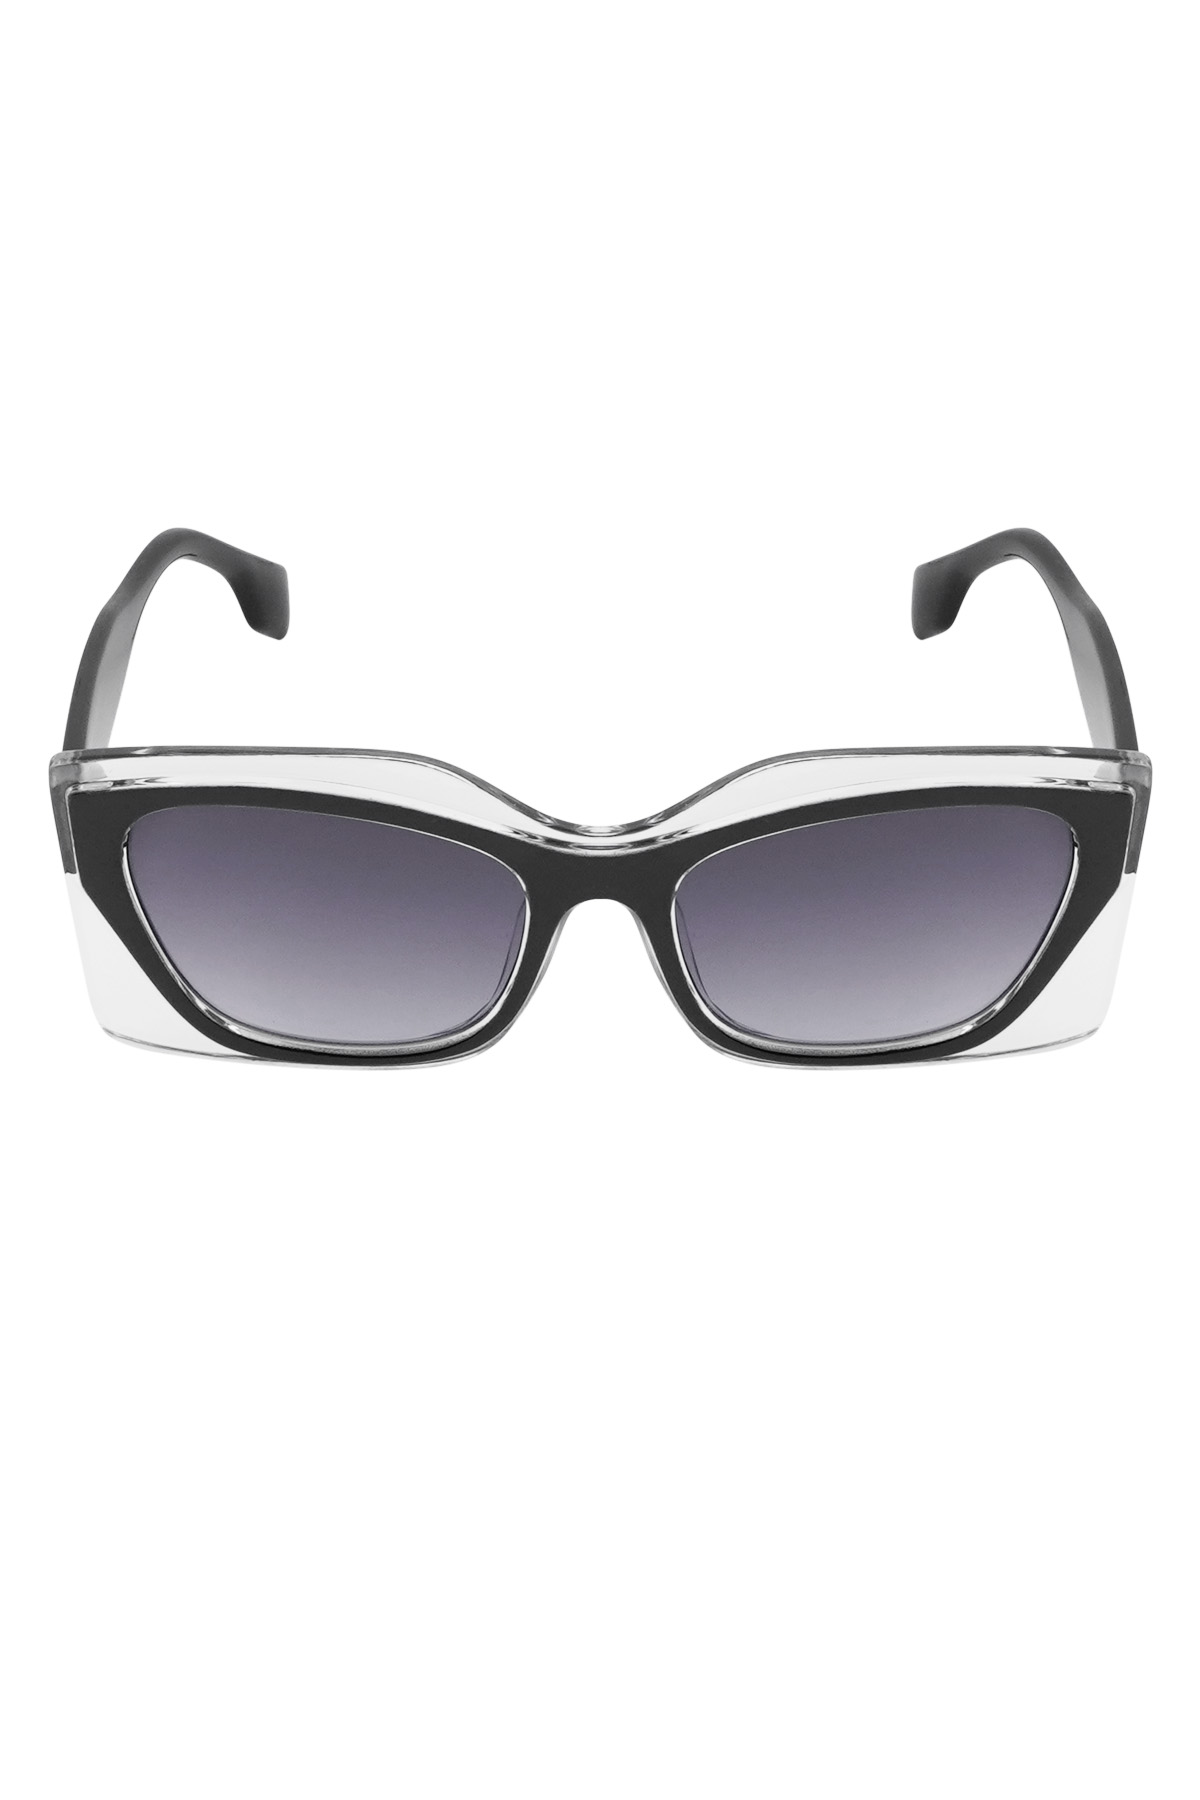 Double frame sunglasses - black/grey Picture4